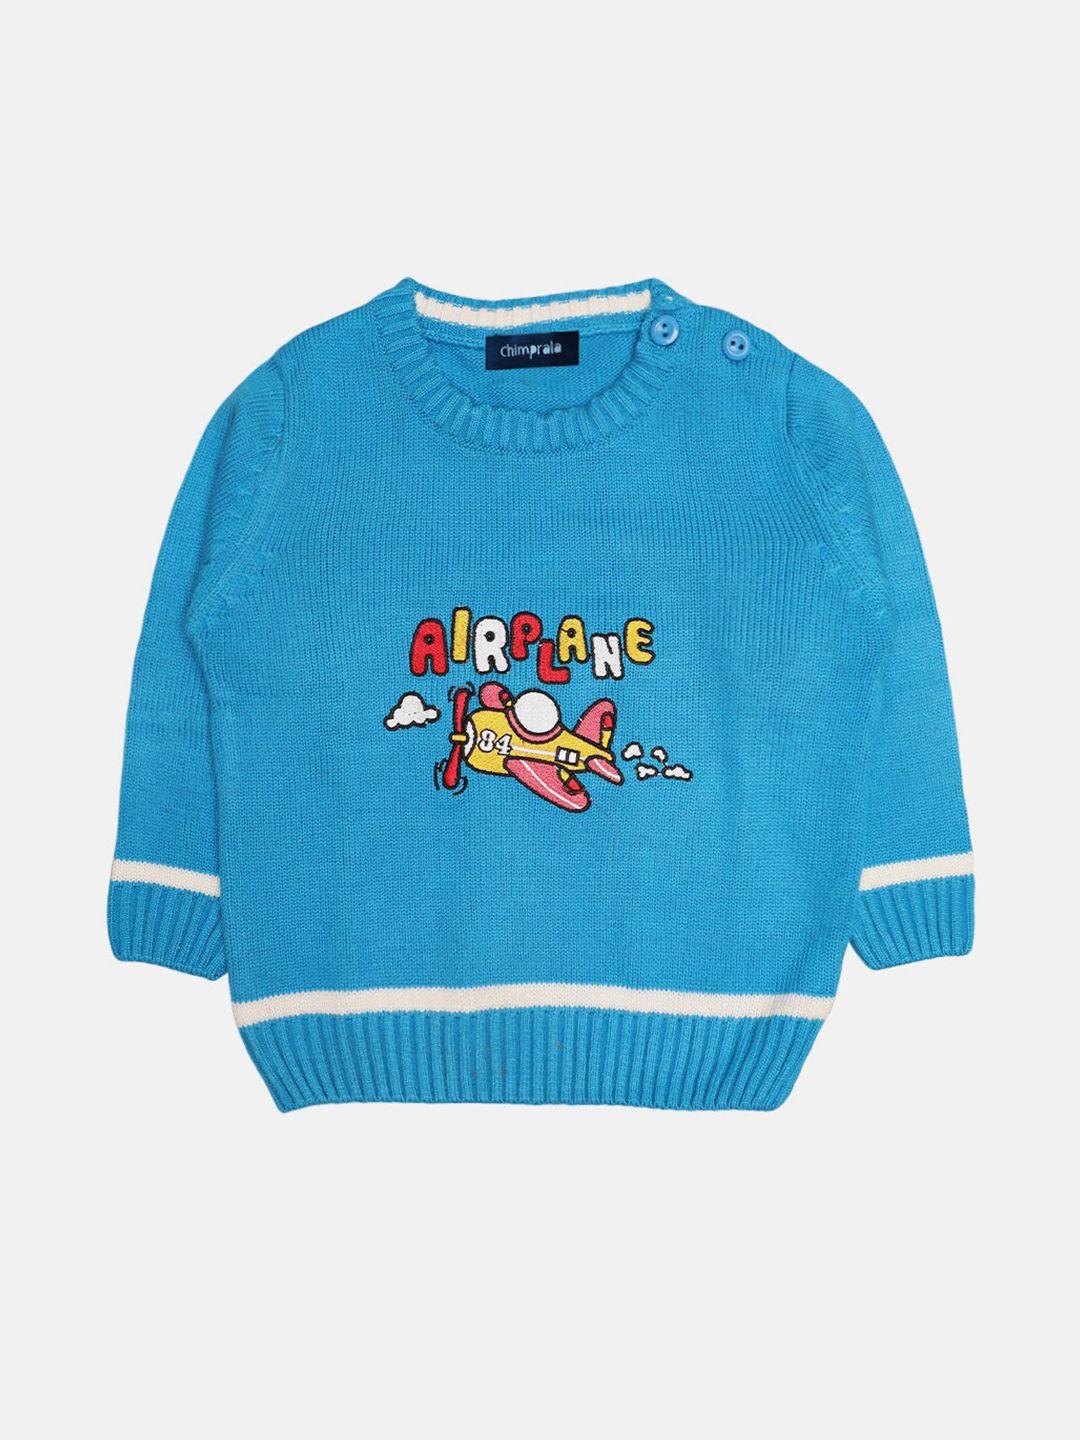 chimprala boys blue & red typography printed pullover